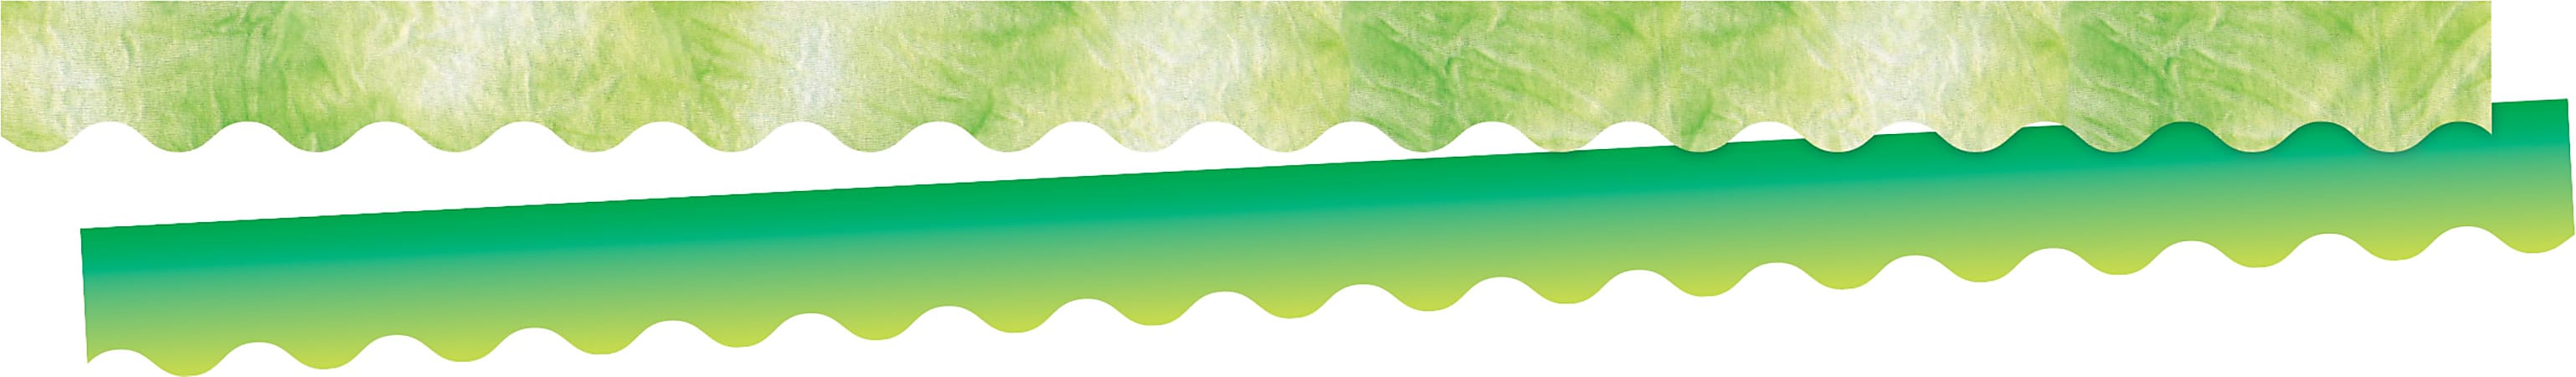 Barker Creek Double-Sided Scalloped Edge Borders, 2-1/4" x 36, Lime Tie-Dye And Ombré, Pack Of 13 Borders